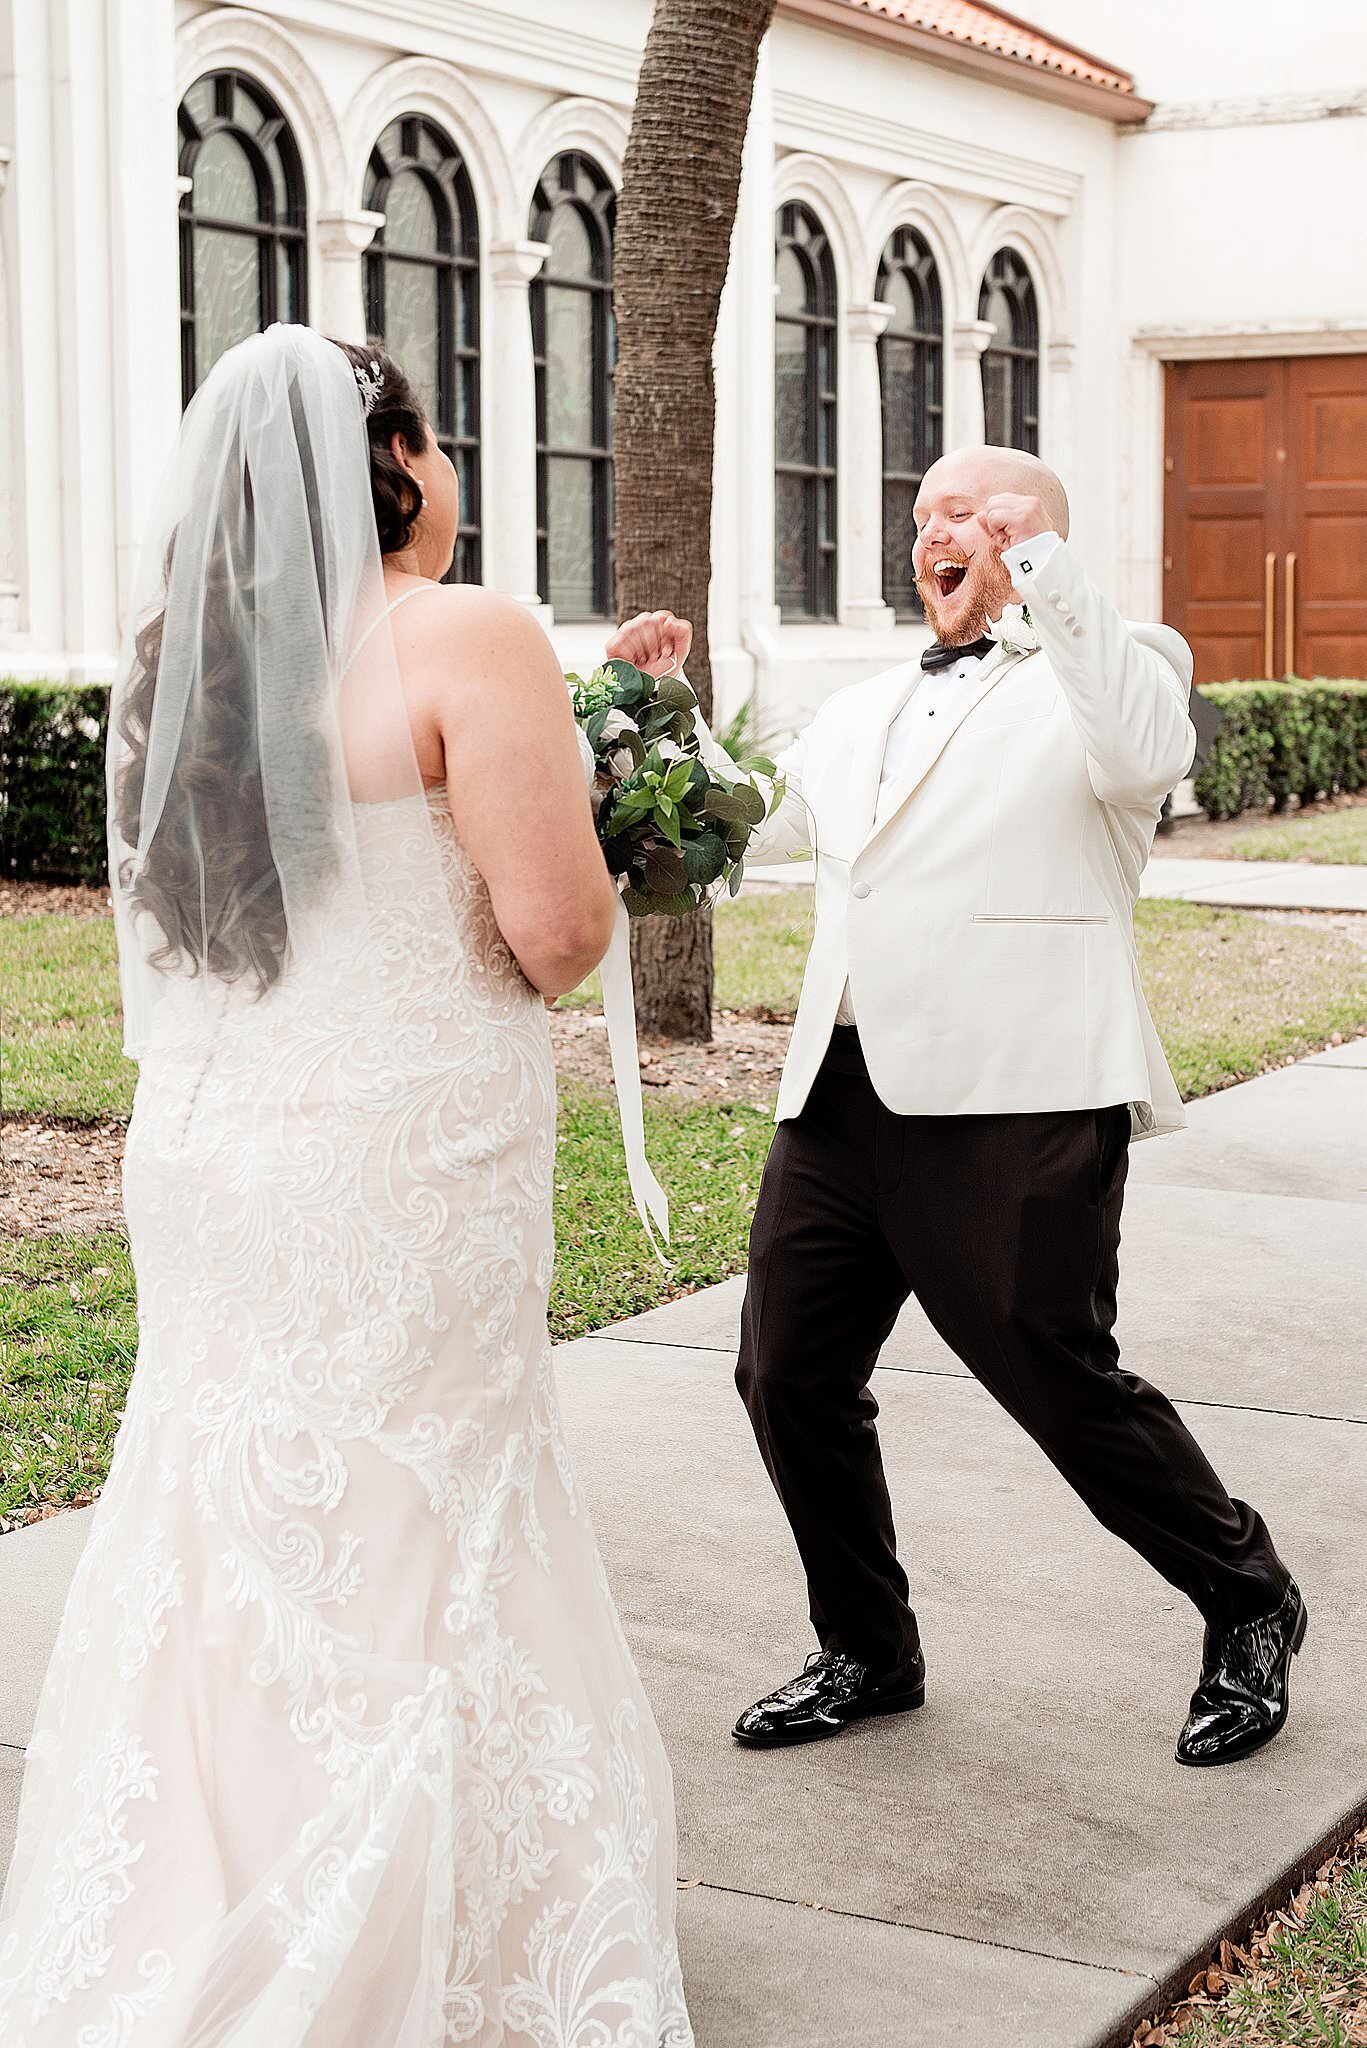 Groom with handlebar mustache  and ivory jacket expressing his excitement at seeing his fiance for the first time on their wedding day